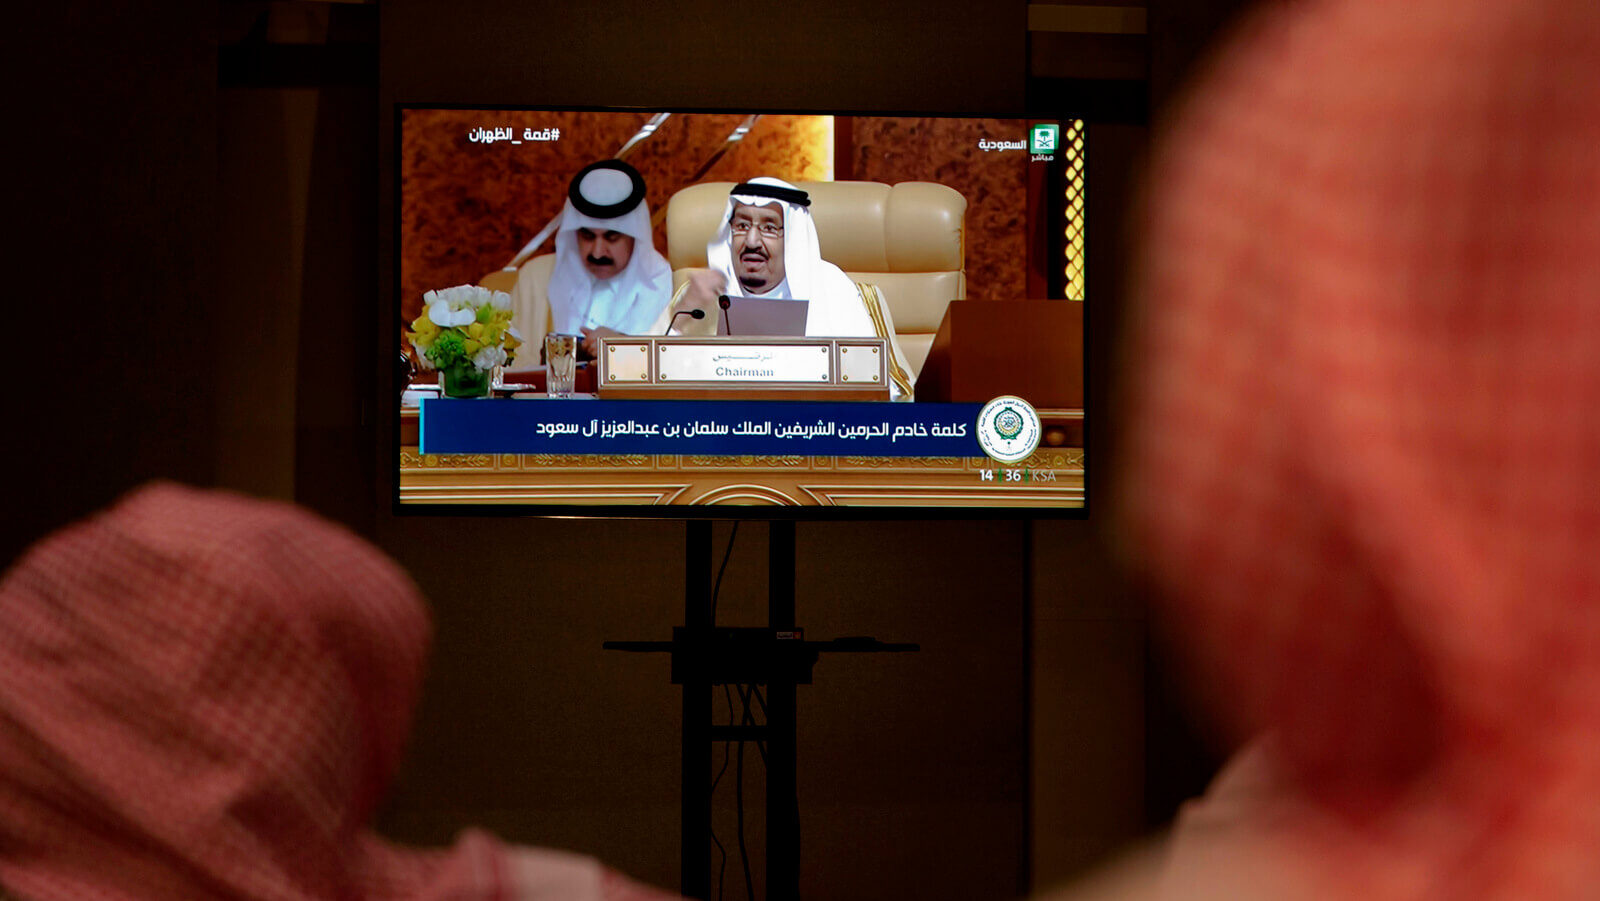 Reporters watch the speech of Saudi King Salman from a press room, during the opening of the Arab summit in Dhahran, Saudi Arabia, April 15, 2018. Amr Nabil | AP